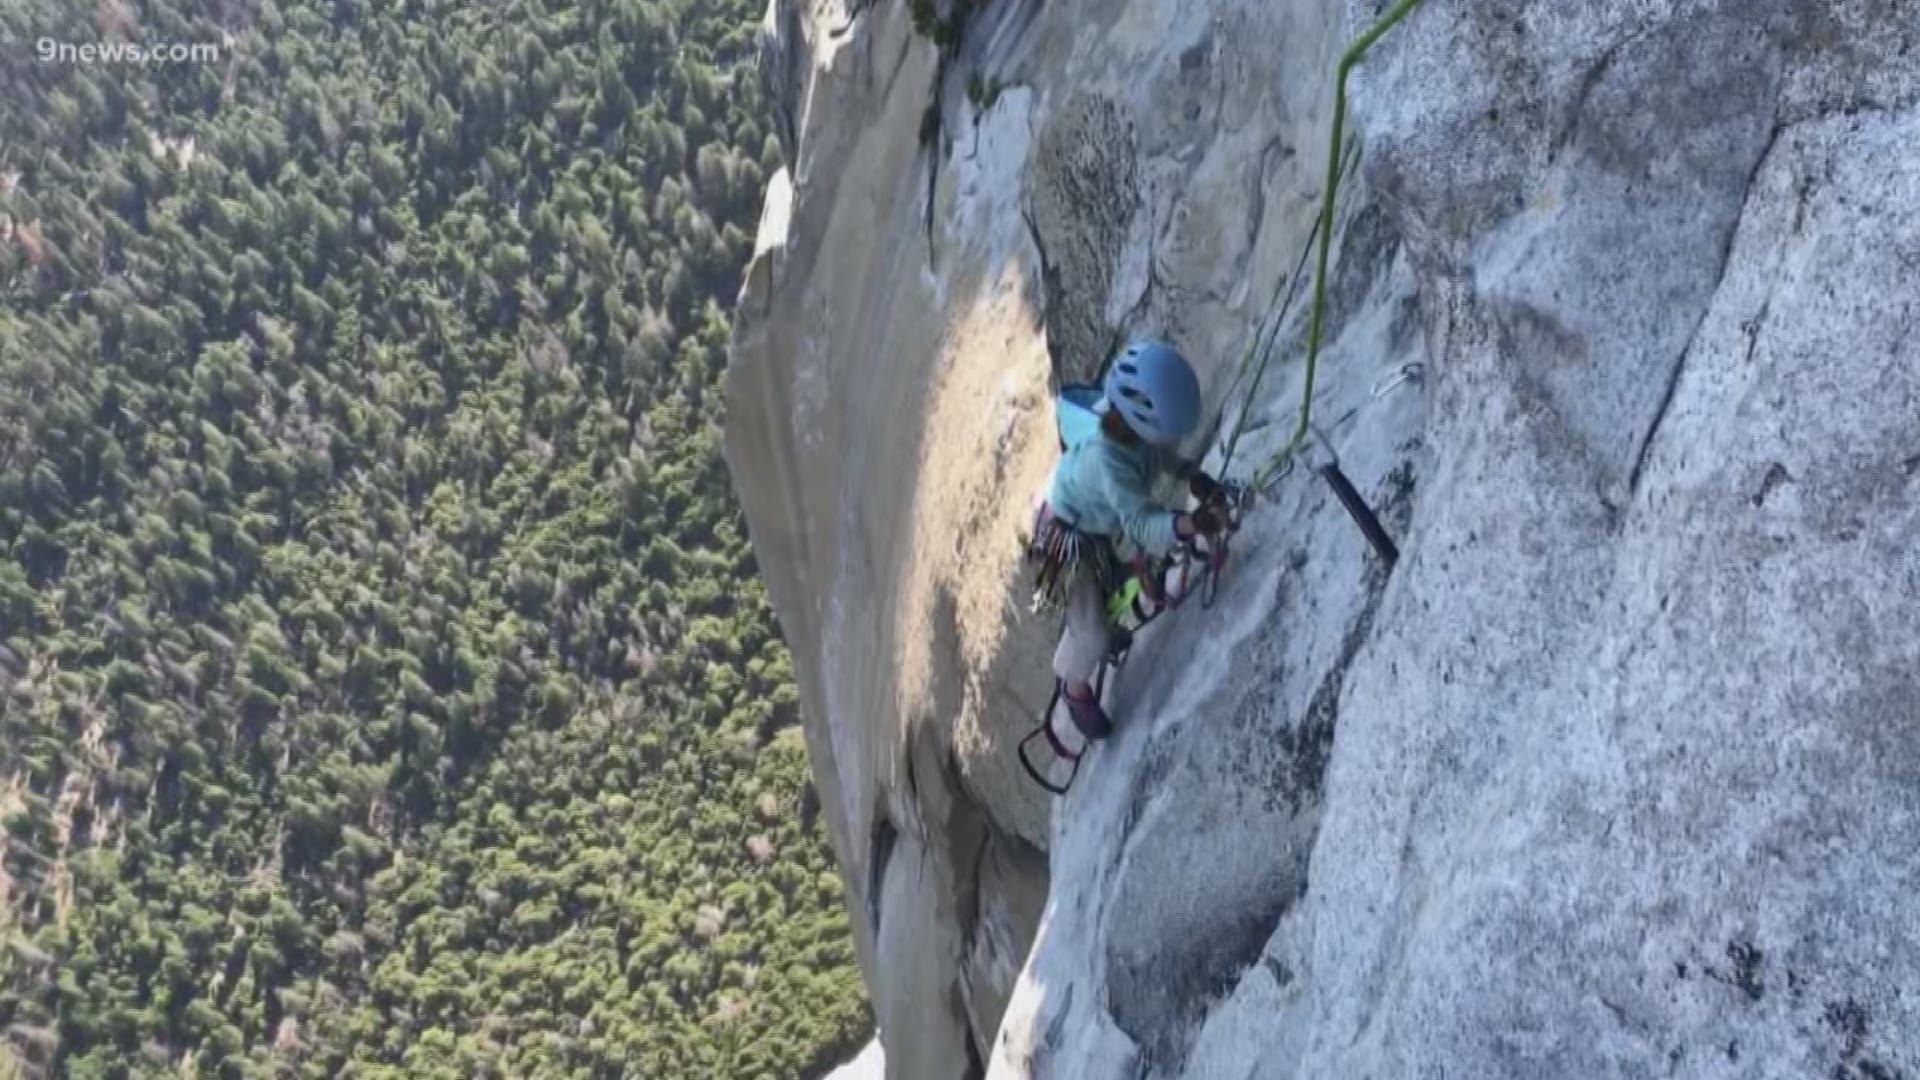 The Glenwood Springs girl is the youngest person to climb the iconic rock face's Nose route.